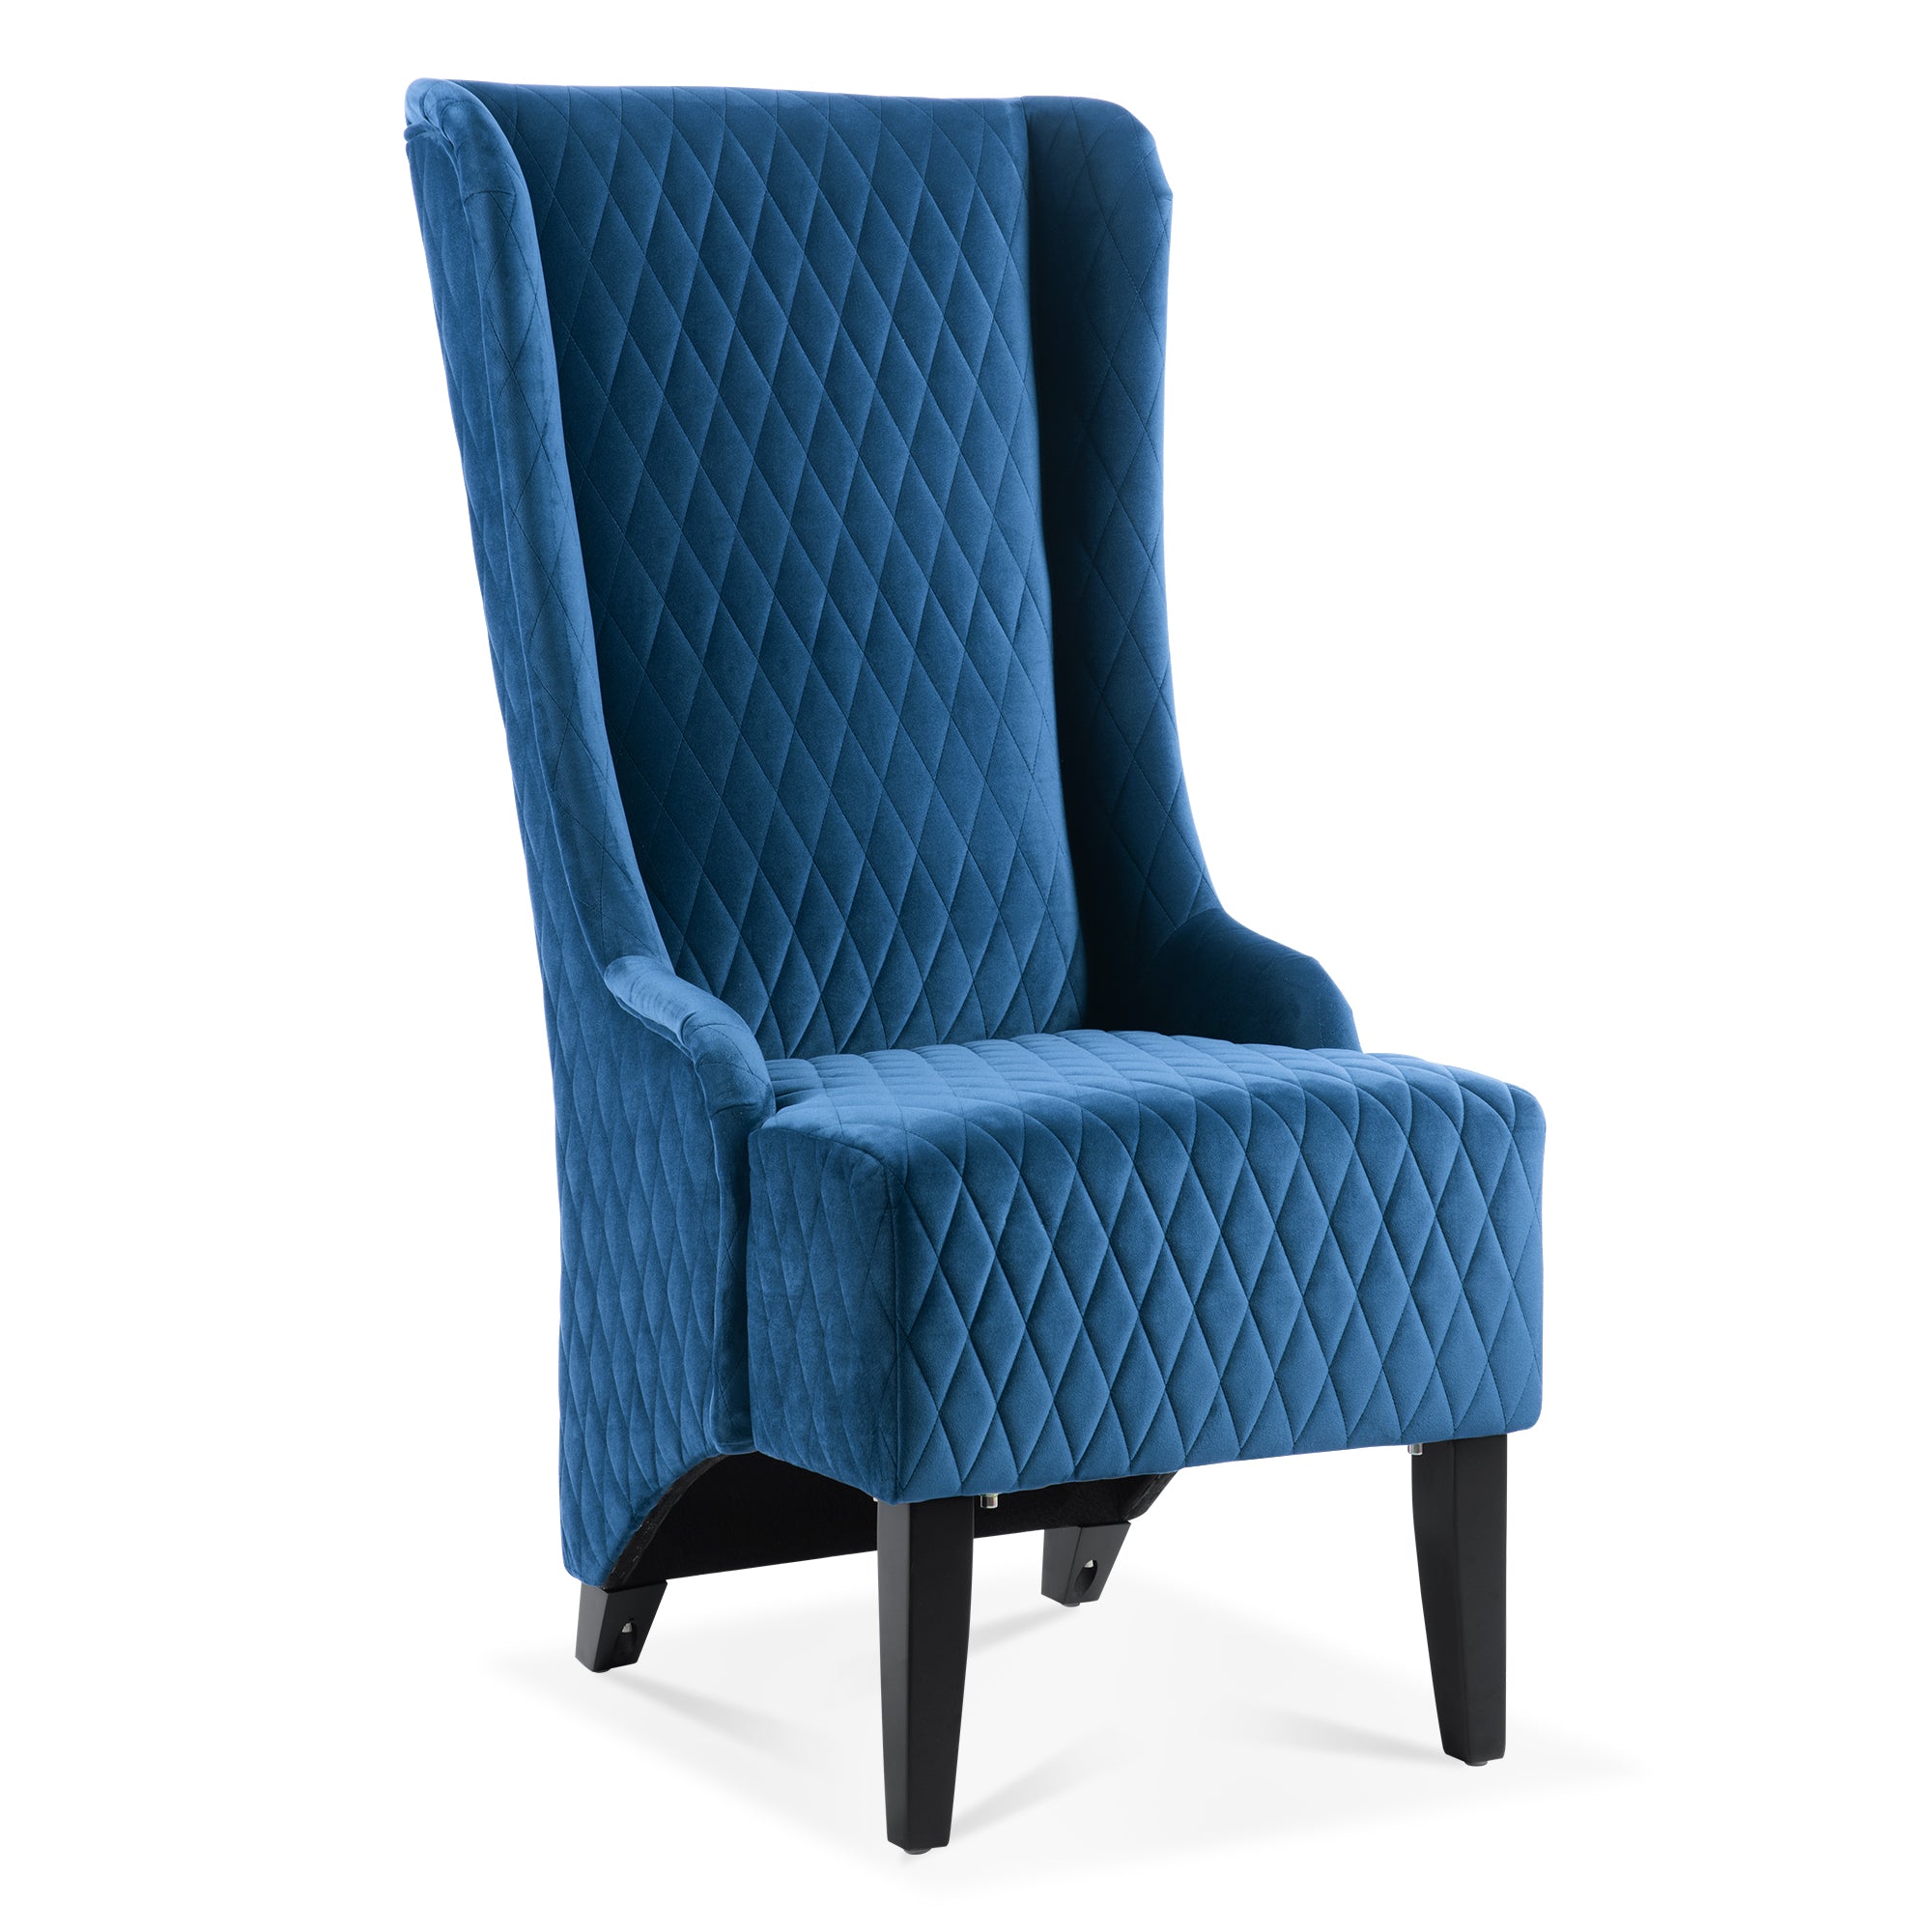 ZNTS 23.03'Wide High-Back Velvet Accent Chair, Comfy High Wingback Chair, Living Room Chair with Soft W68057081